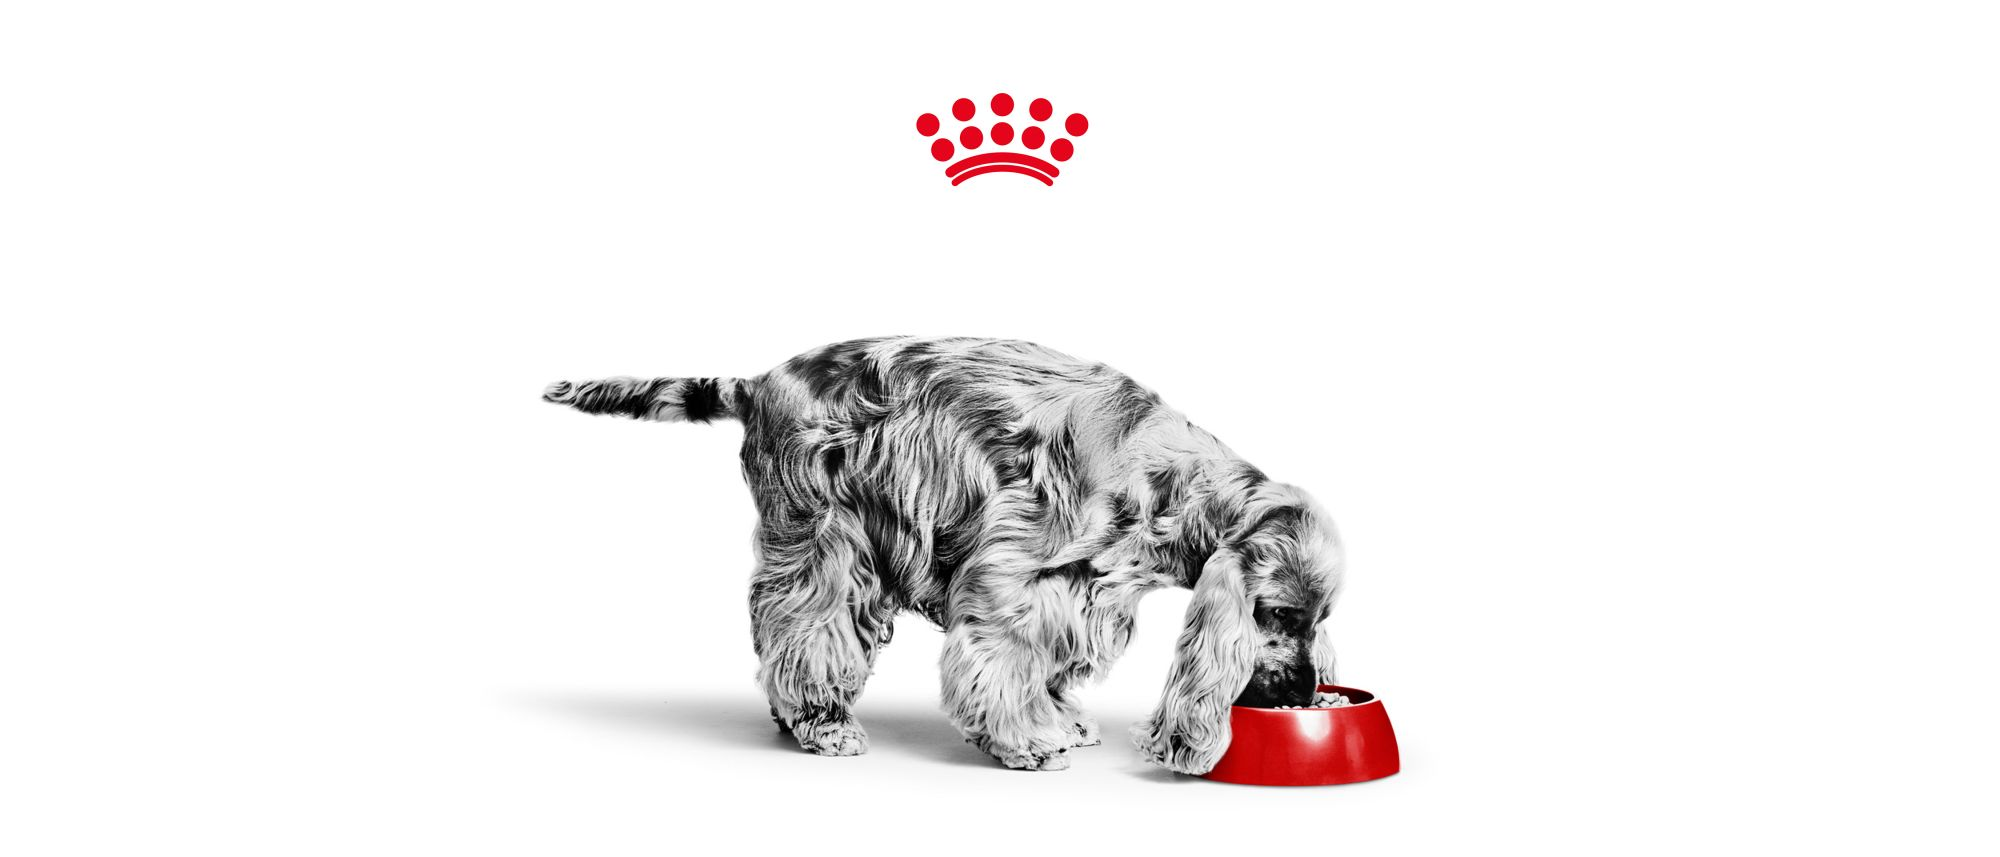 ROYAL CANIN ® launch PROactive at the 4th International Dog Health Workshop